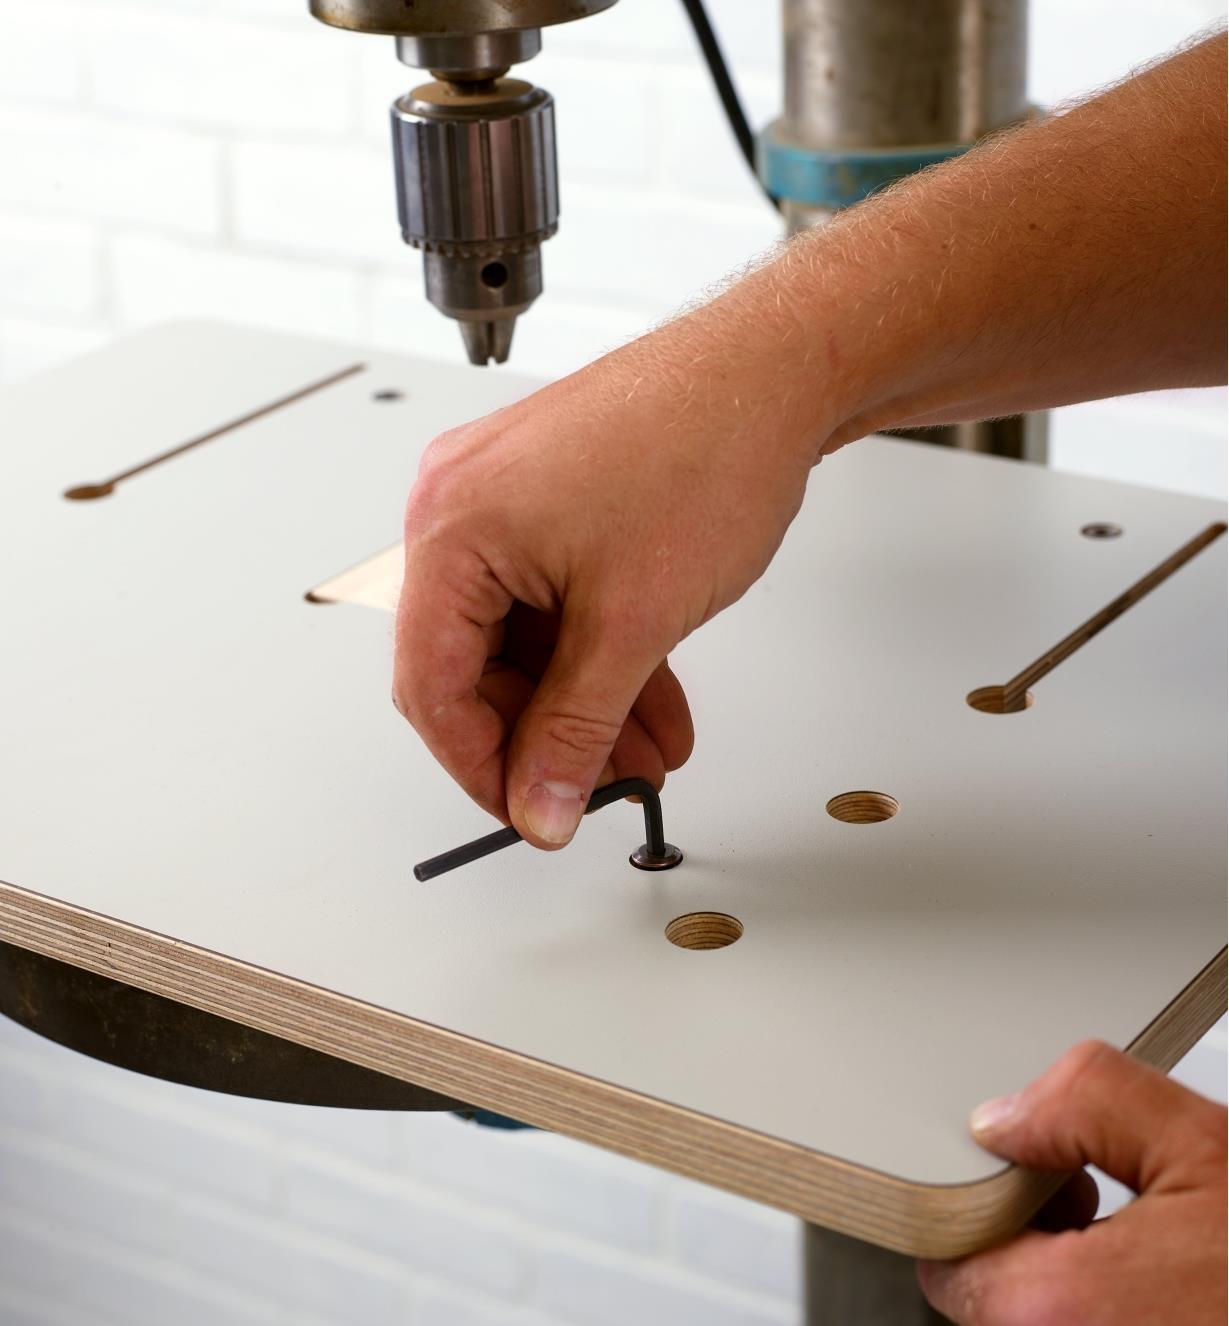 Securing the table top to the mounting plate